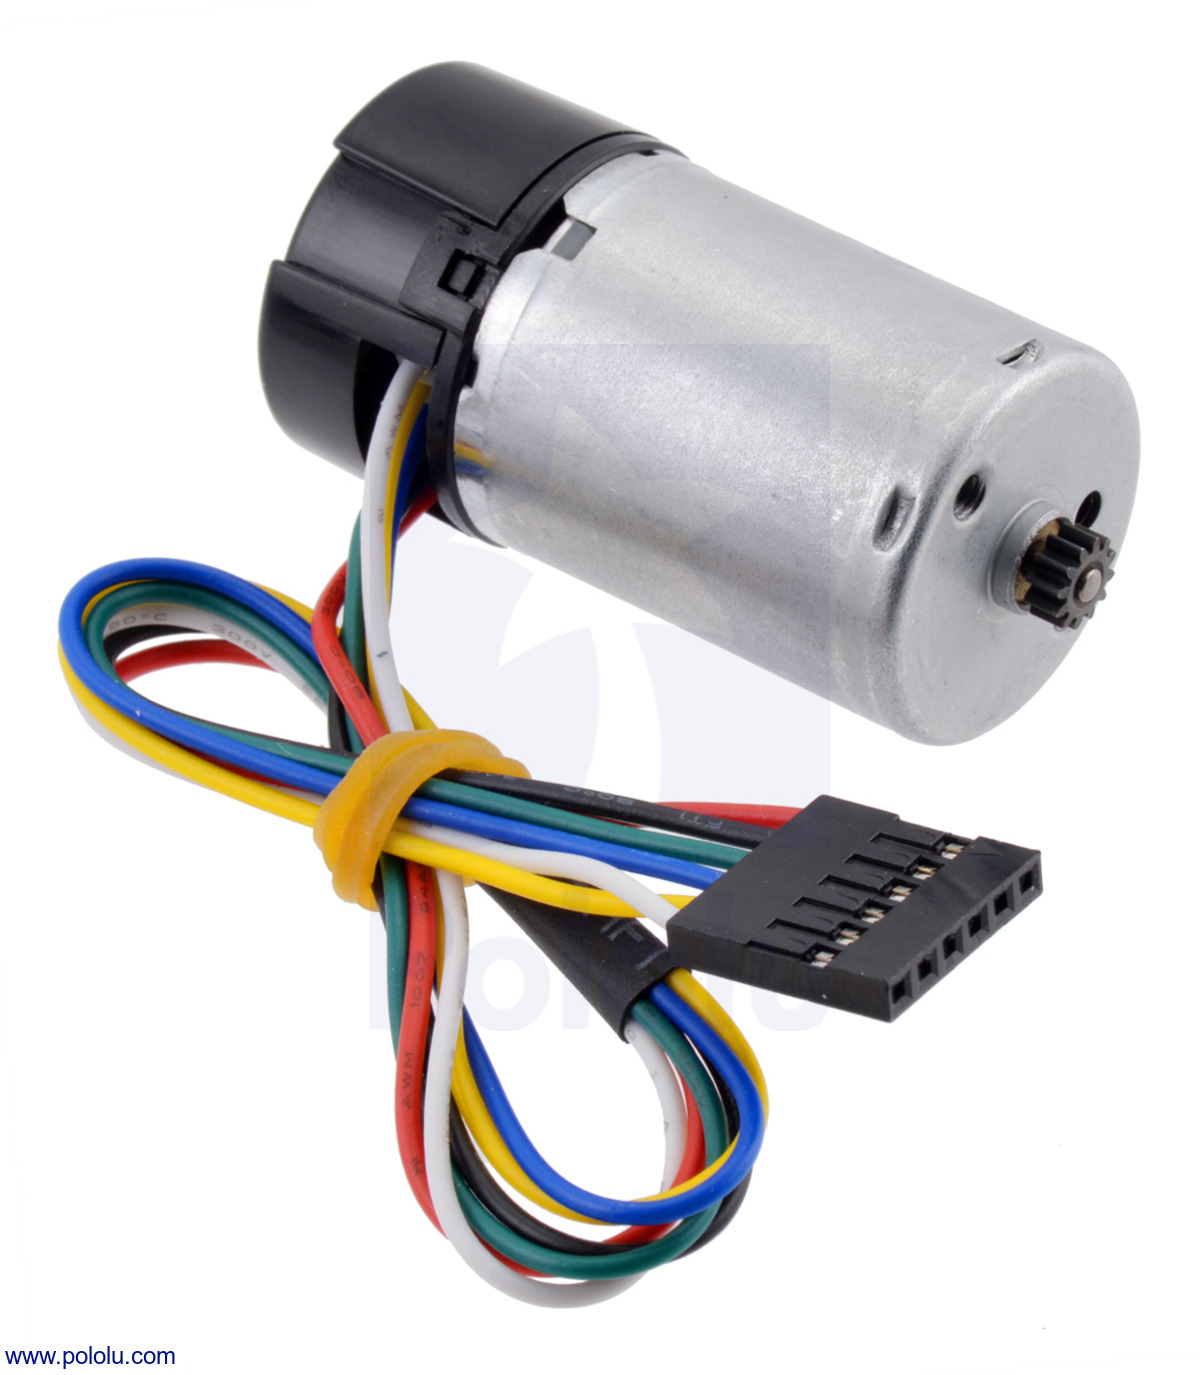 MP 12V Motor with 48 CPR Encoder for 25D mm Metal Gearmotors (No Gearbox)